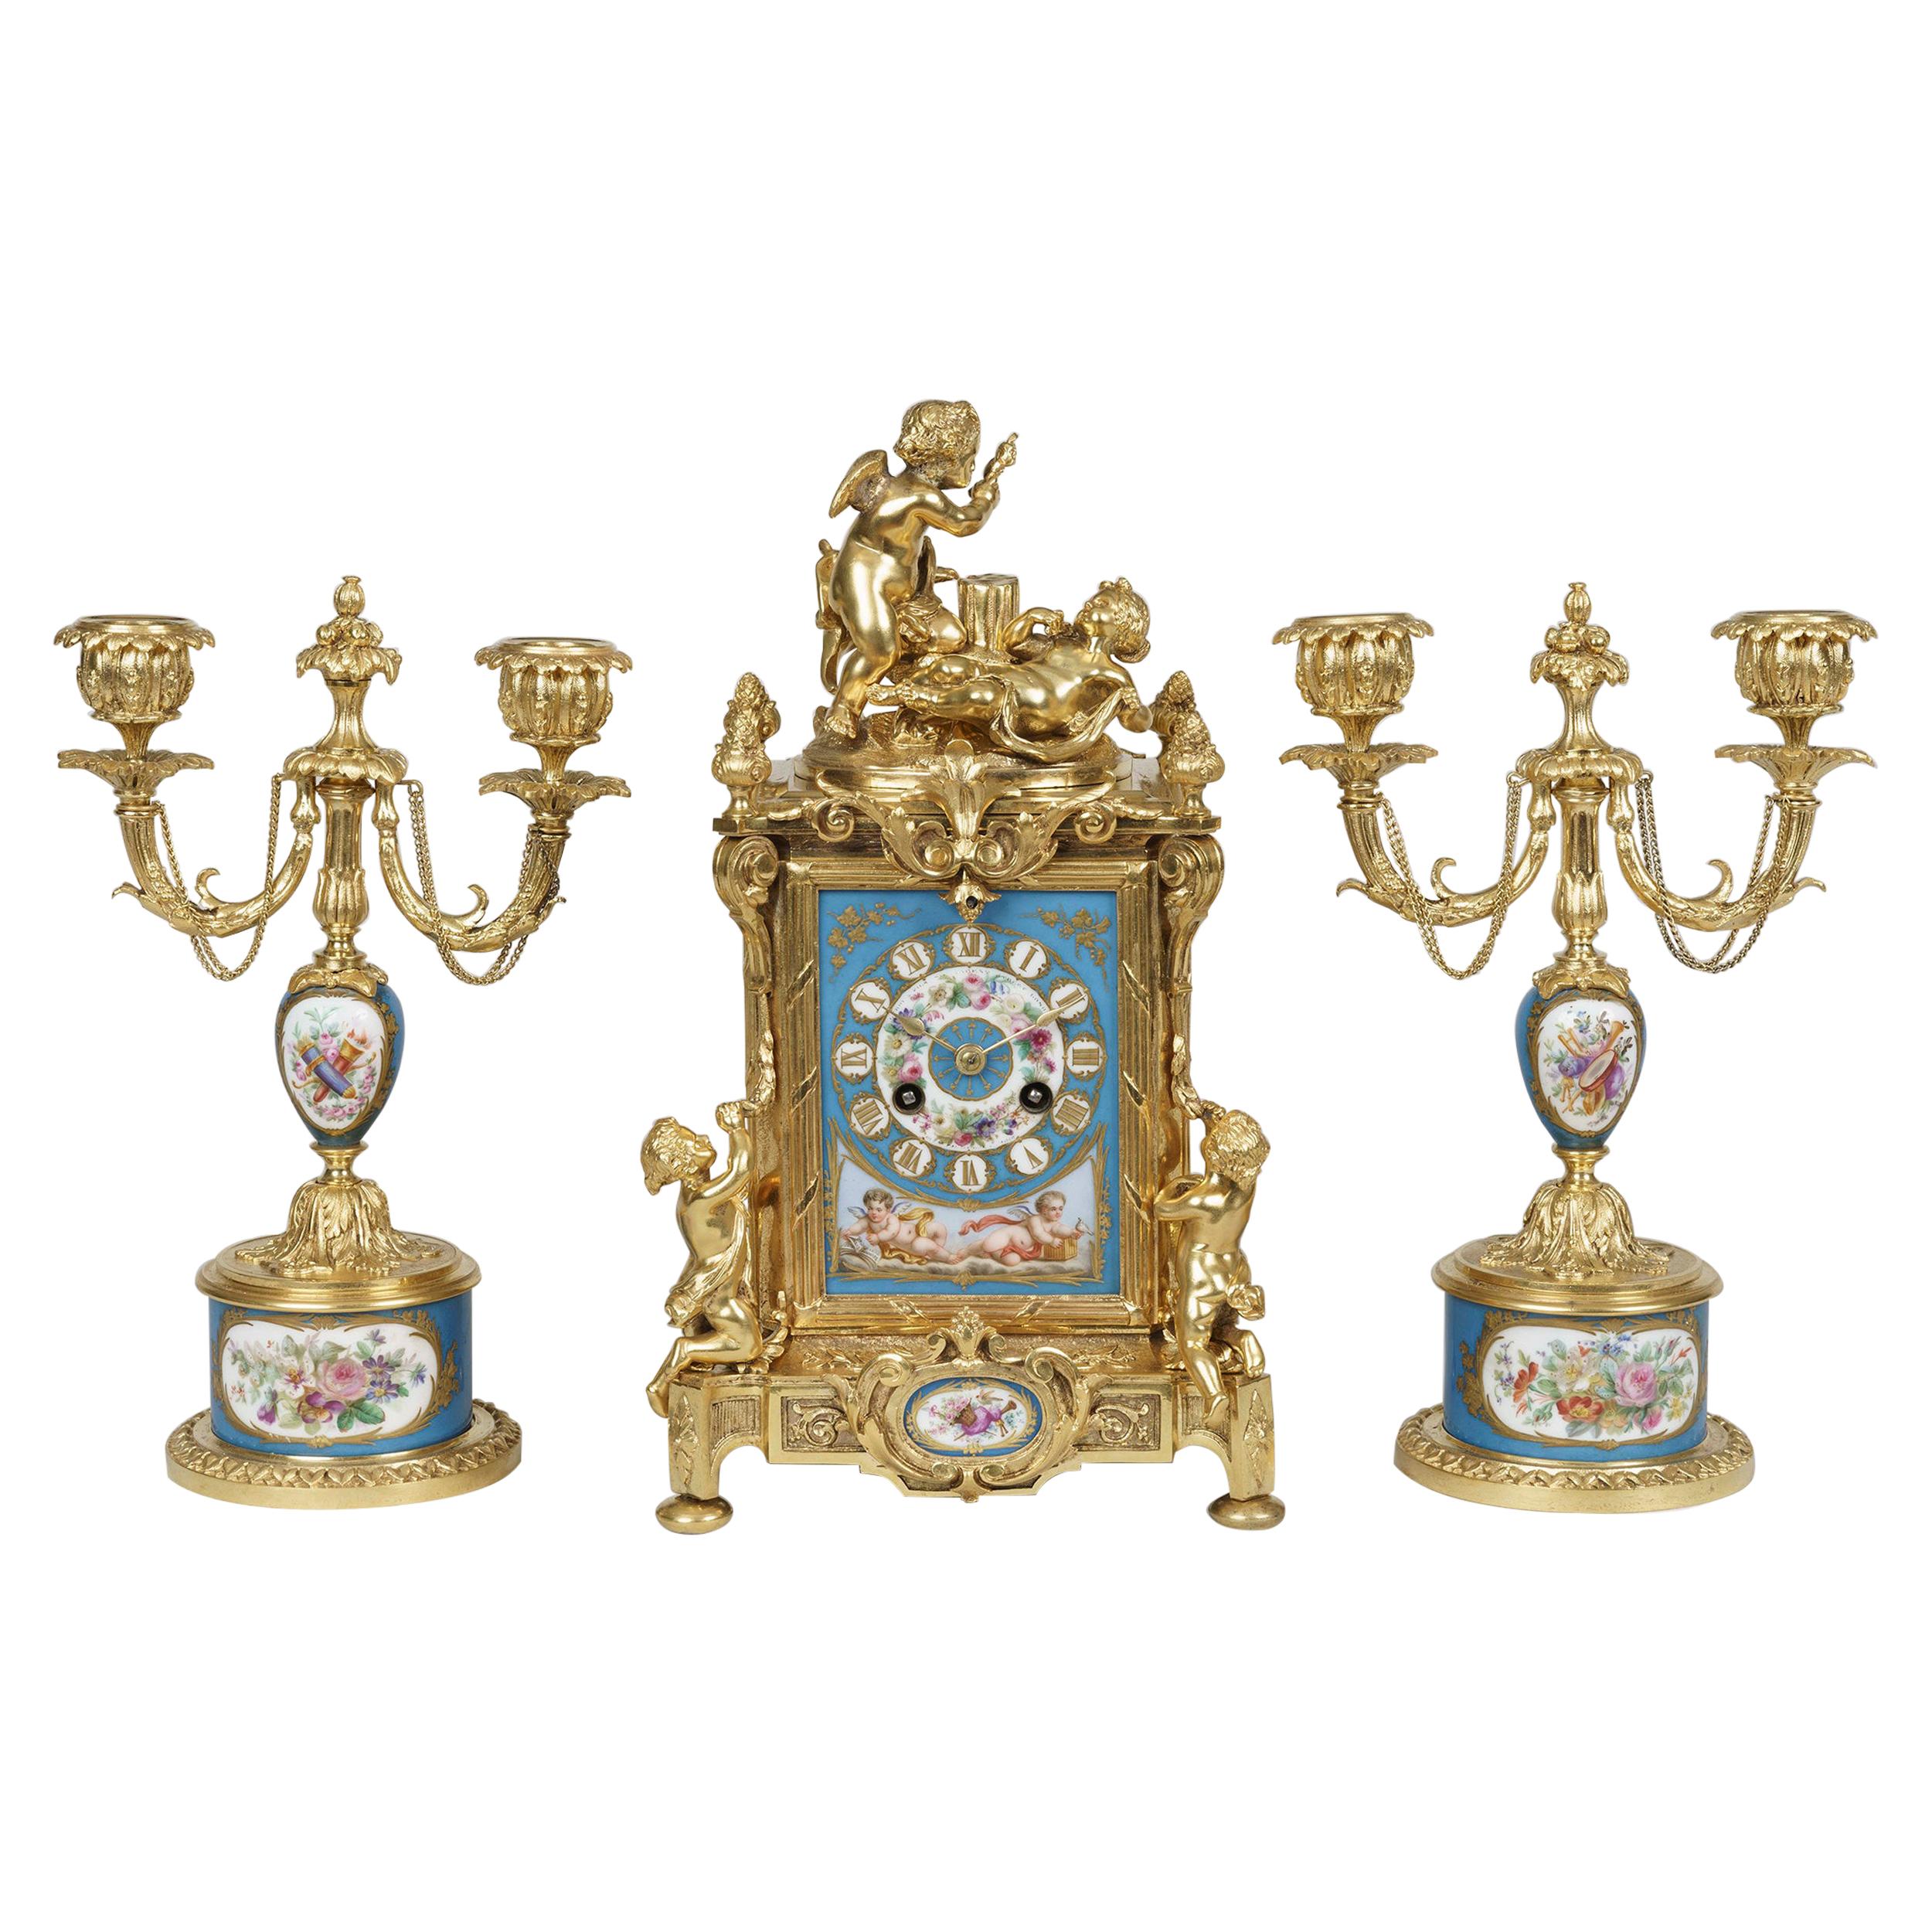 Ormolu and Sèvres Style Porcelain Mounted Clock Set in the Louis XVI Manner